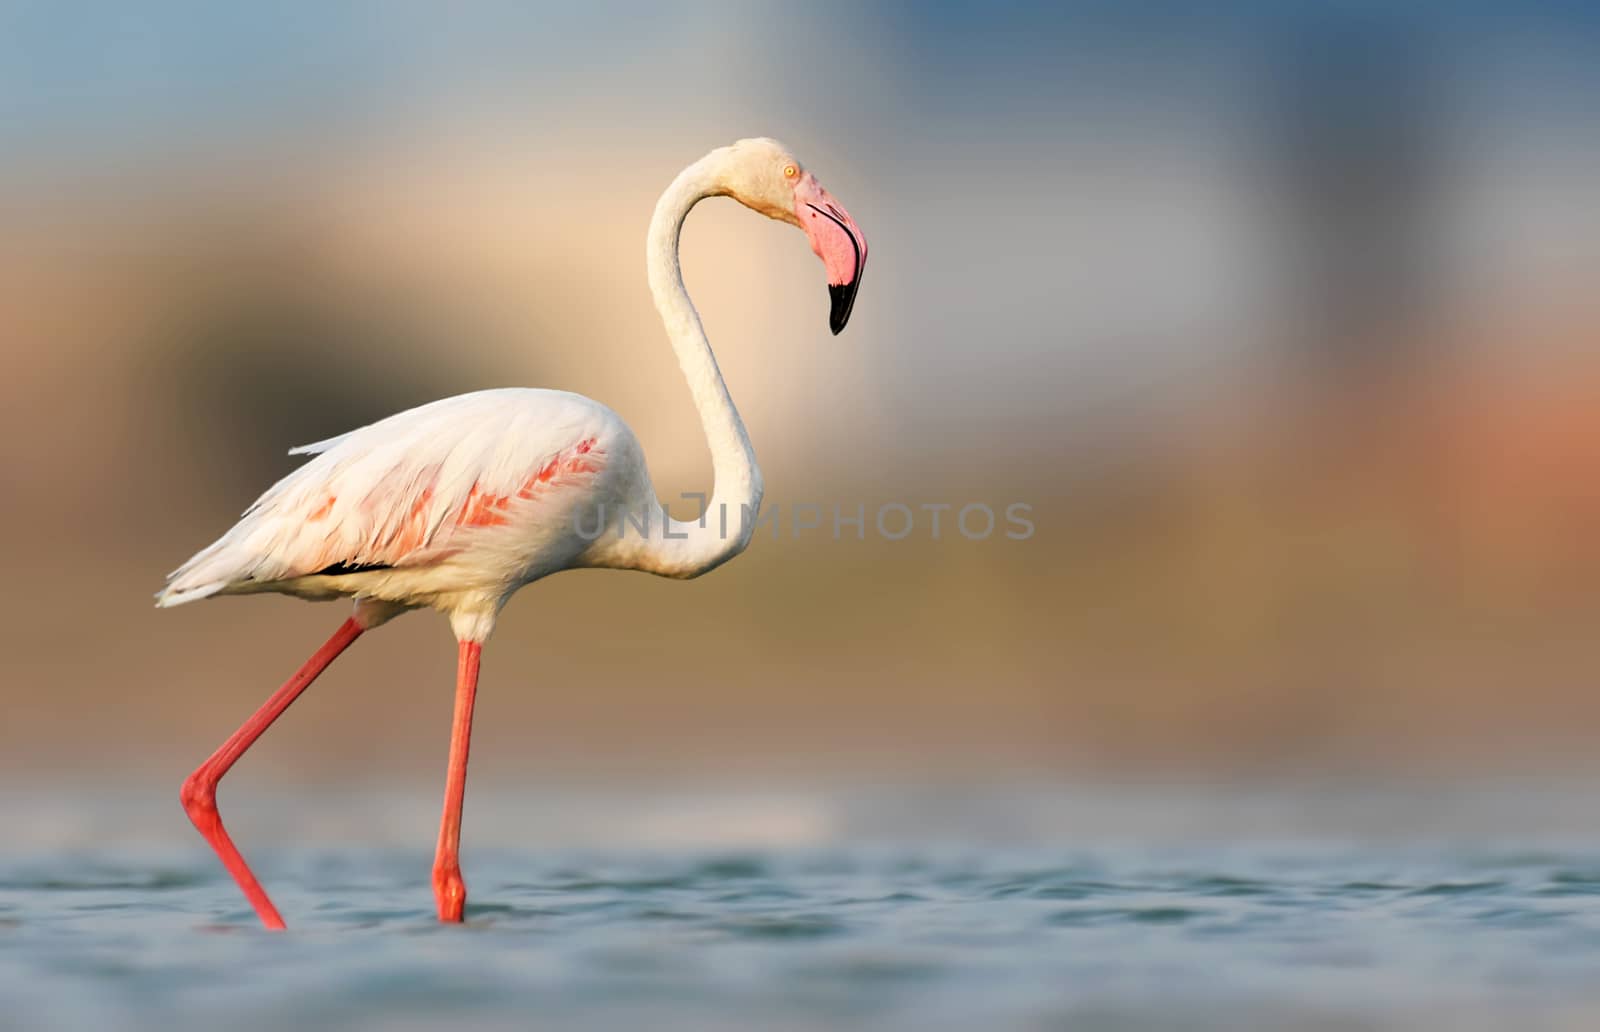 These famous pink birds can be found in warm, watery regions on many continents. They favor environments like estuaries and saline or alkaline lakes.